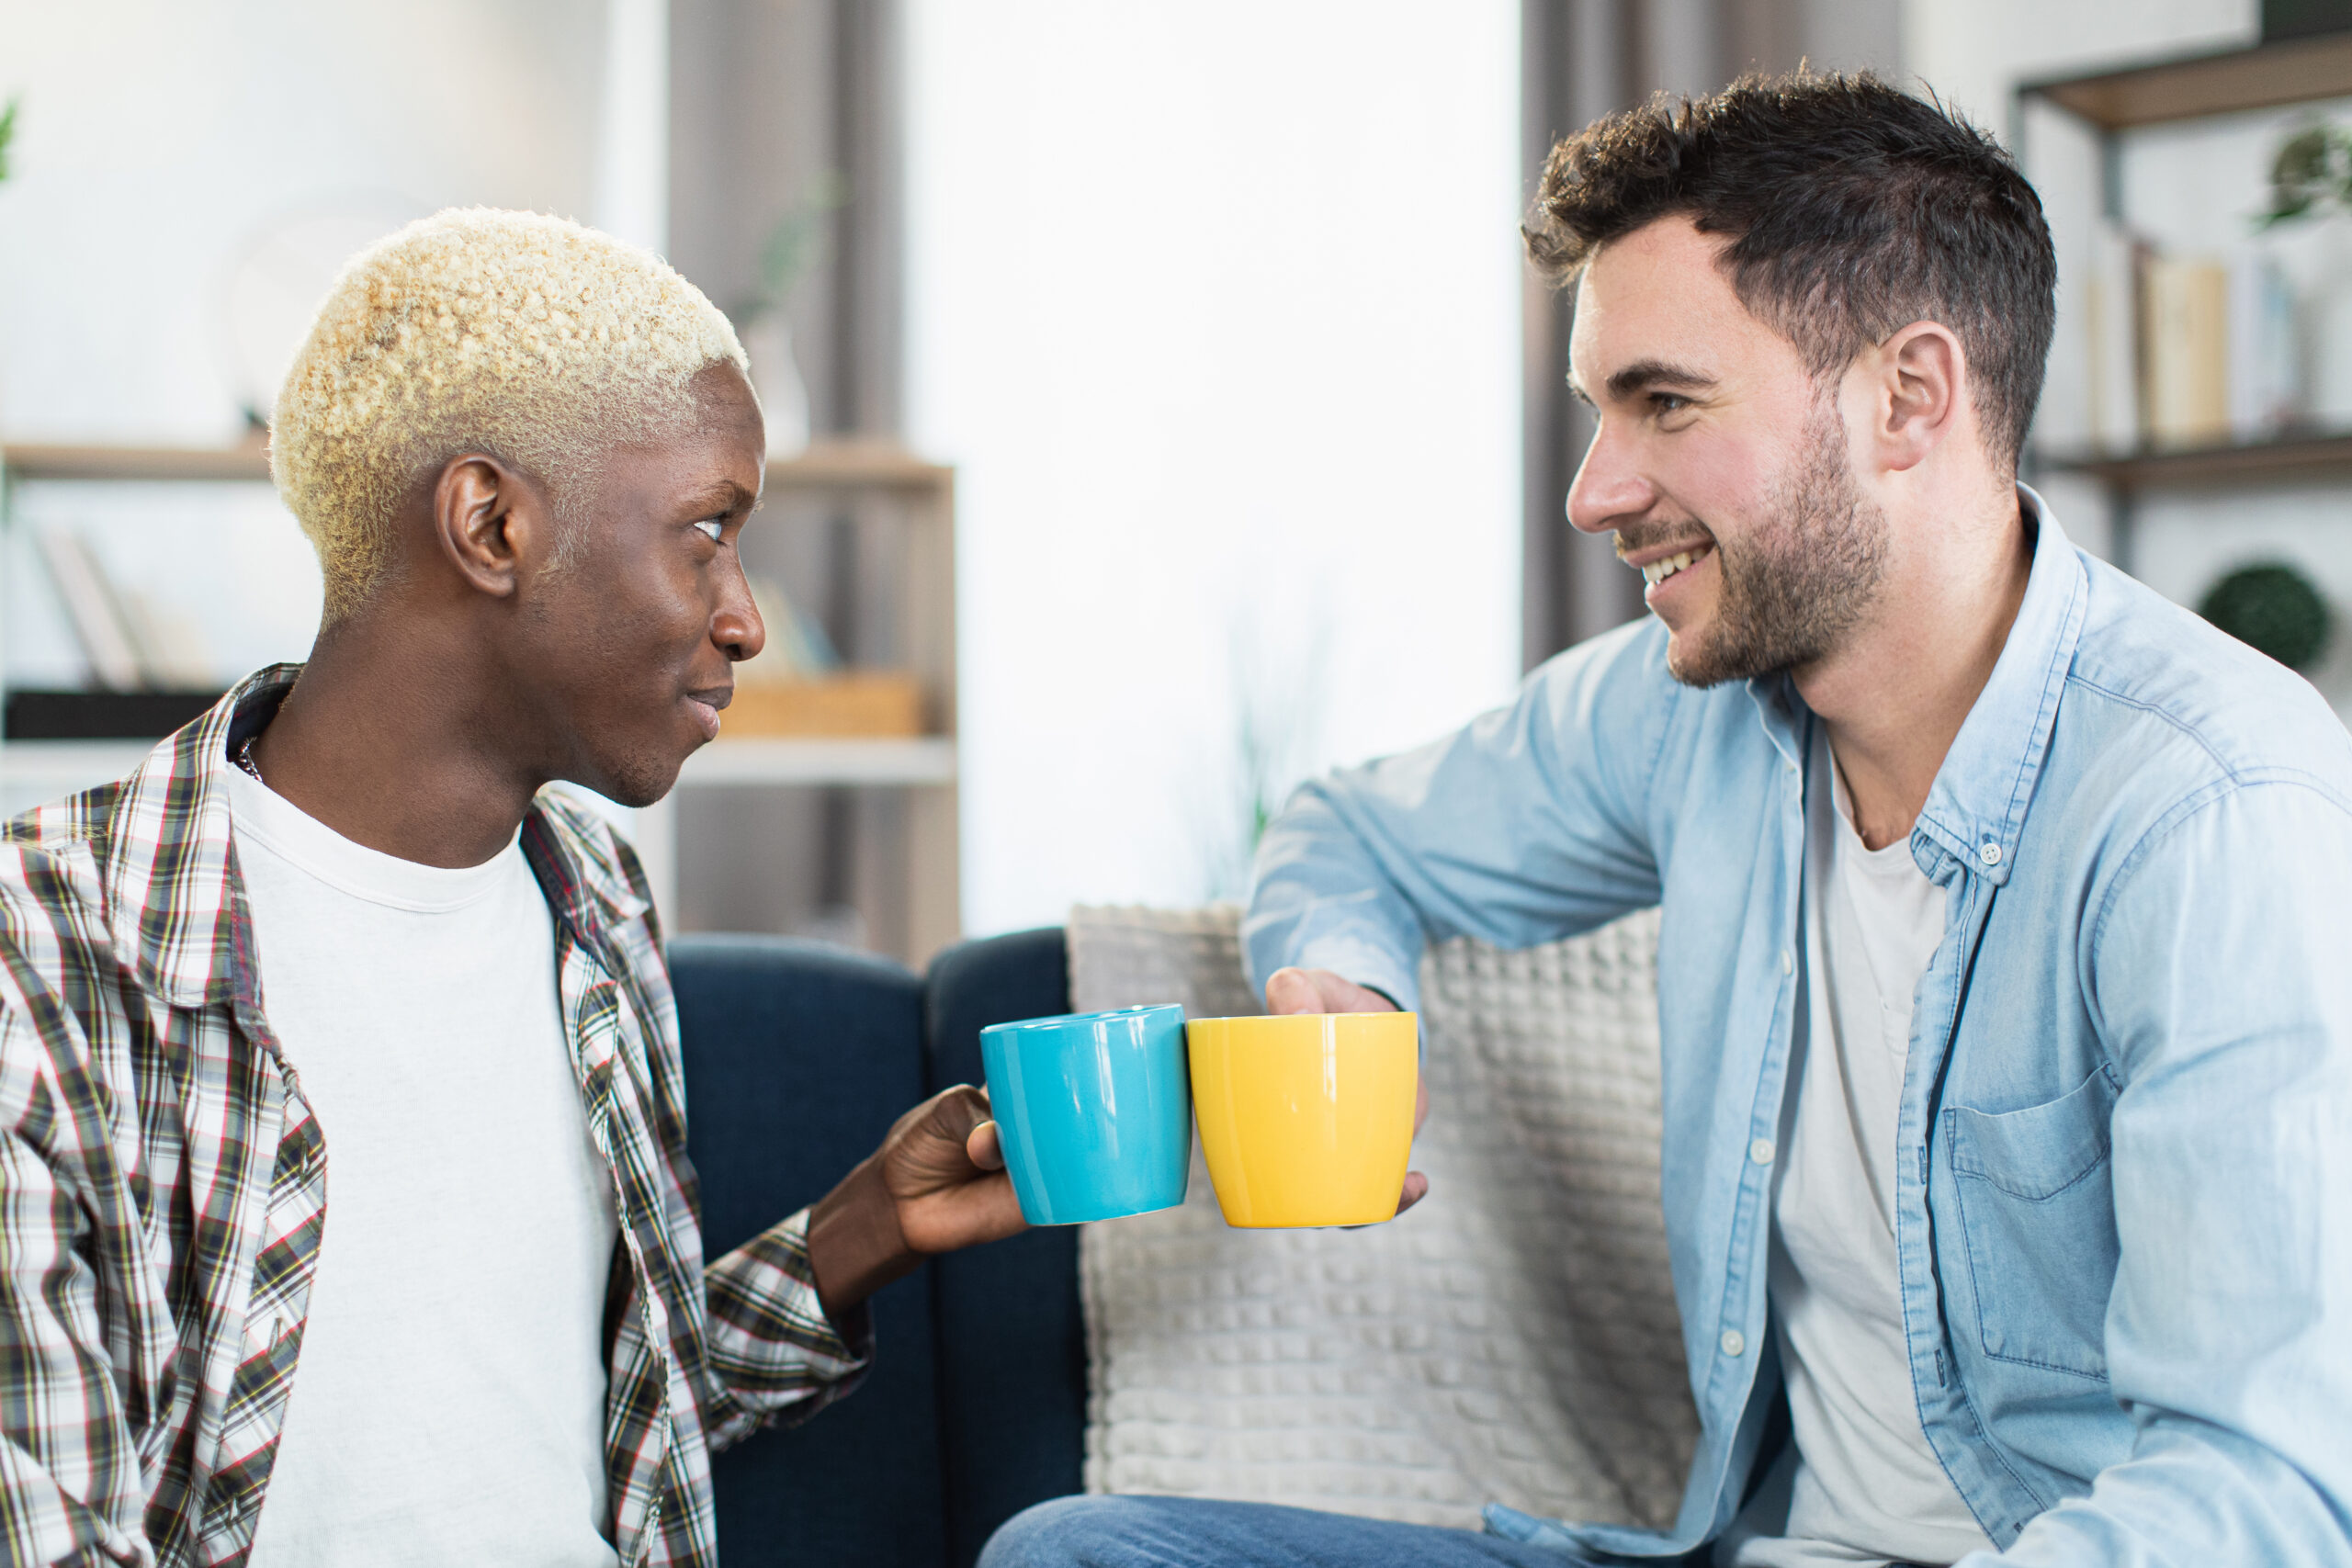 A content gay couple in New York City, enjoying quality time together in their cozy living room with cups of coffee, after successfully enhancing their sex life and relationship through sex and schema therapy at GayCouplesTherapy.com, which has helped them achieve greater intimacy and happiness in their day-to-day lives.